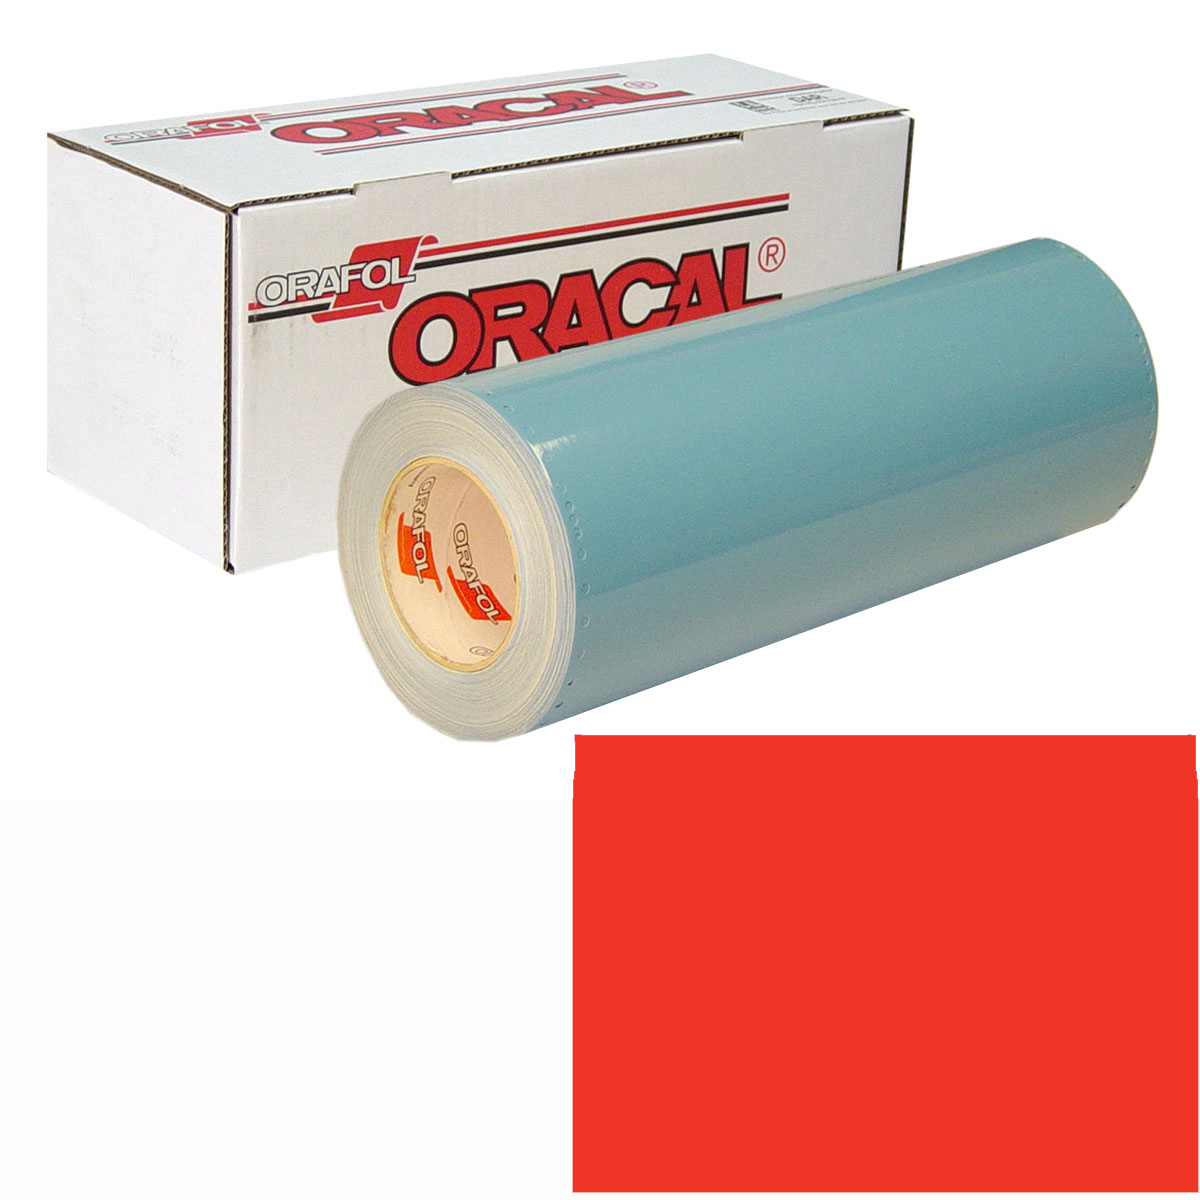 ORACAL 751 30in X 50yd 028 Cardinal Red